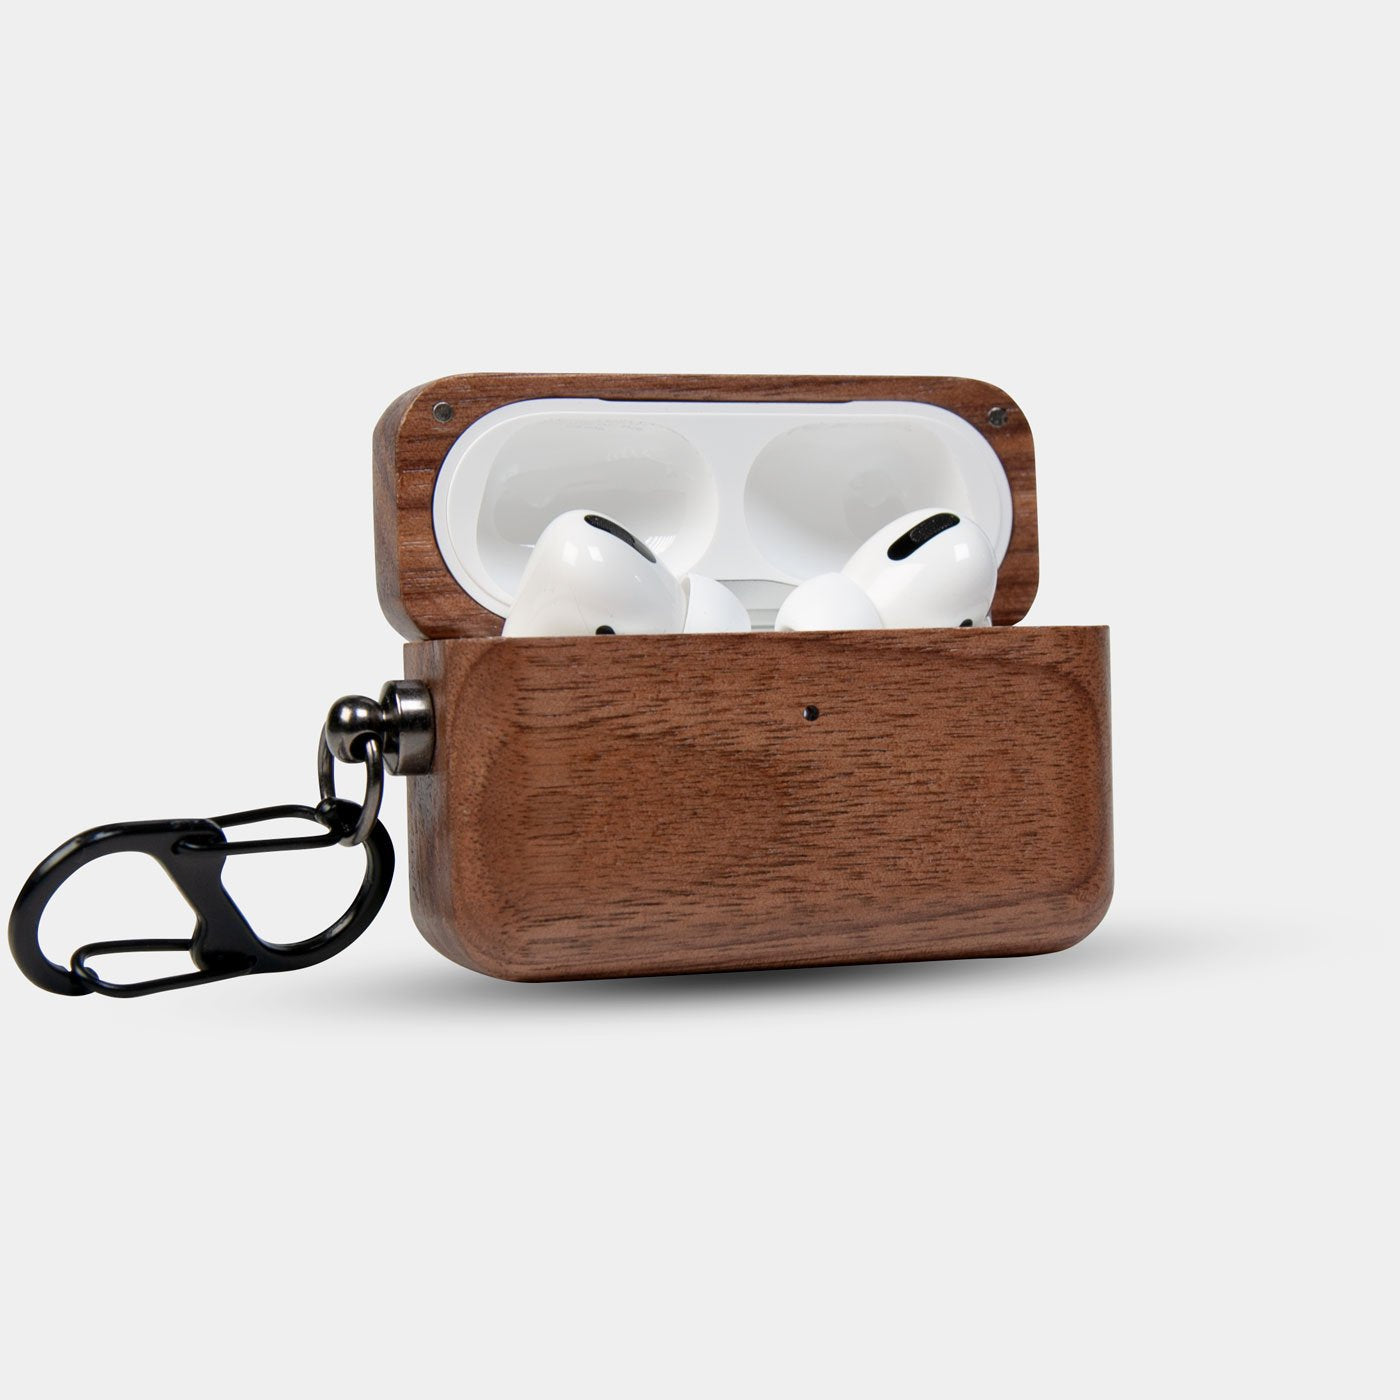 Custom Buffalo Bills AirPods Cases | AirPods | AirPods Pro - Carved Wood Bills AirPods Cover